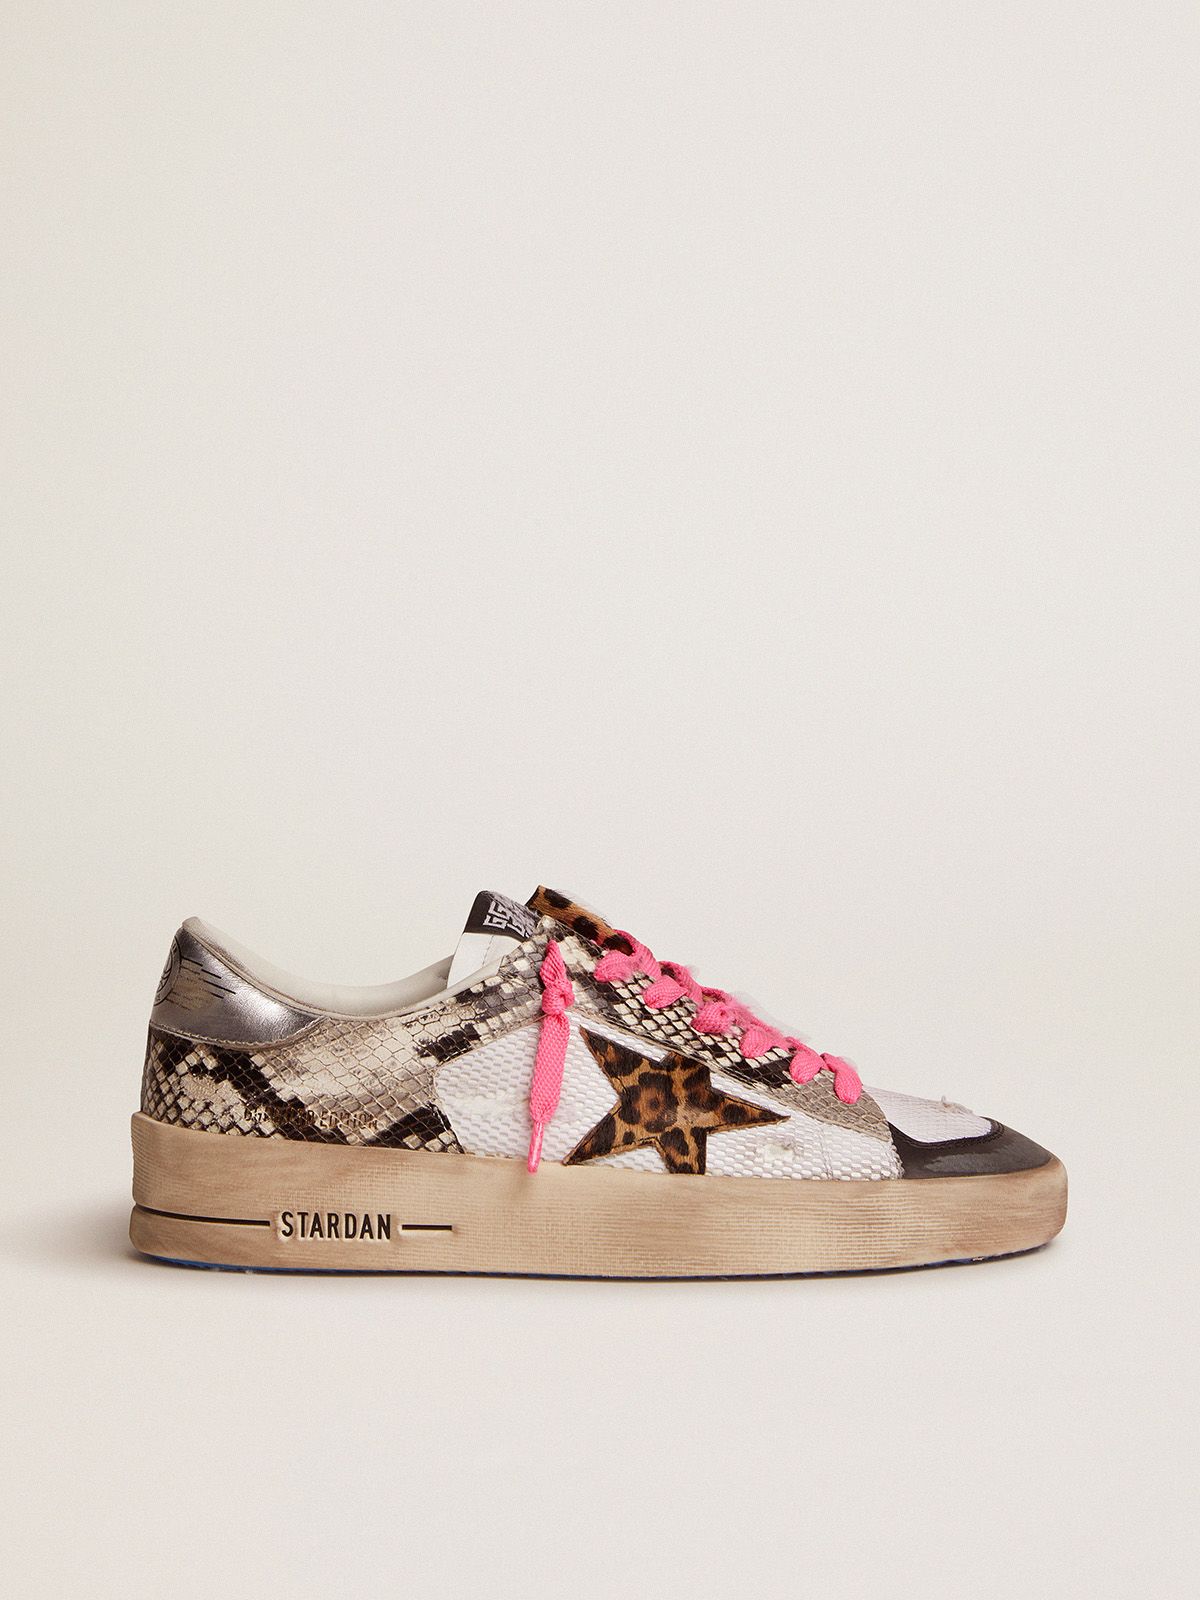 Golden Goose Saldi Uomo Stardan LAB sneakers with snake-print leather upper and leopard-print pony skin star